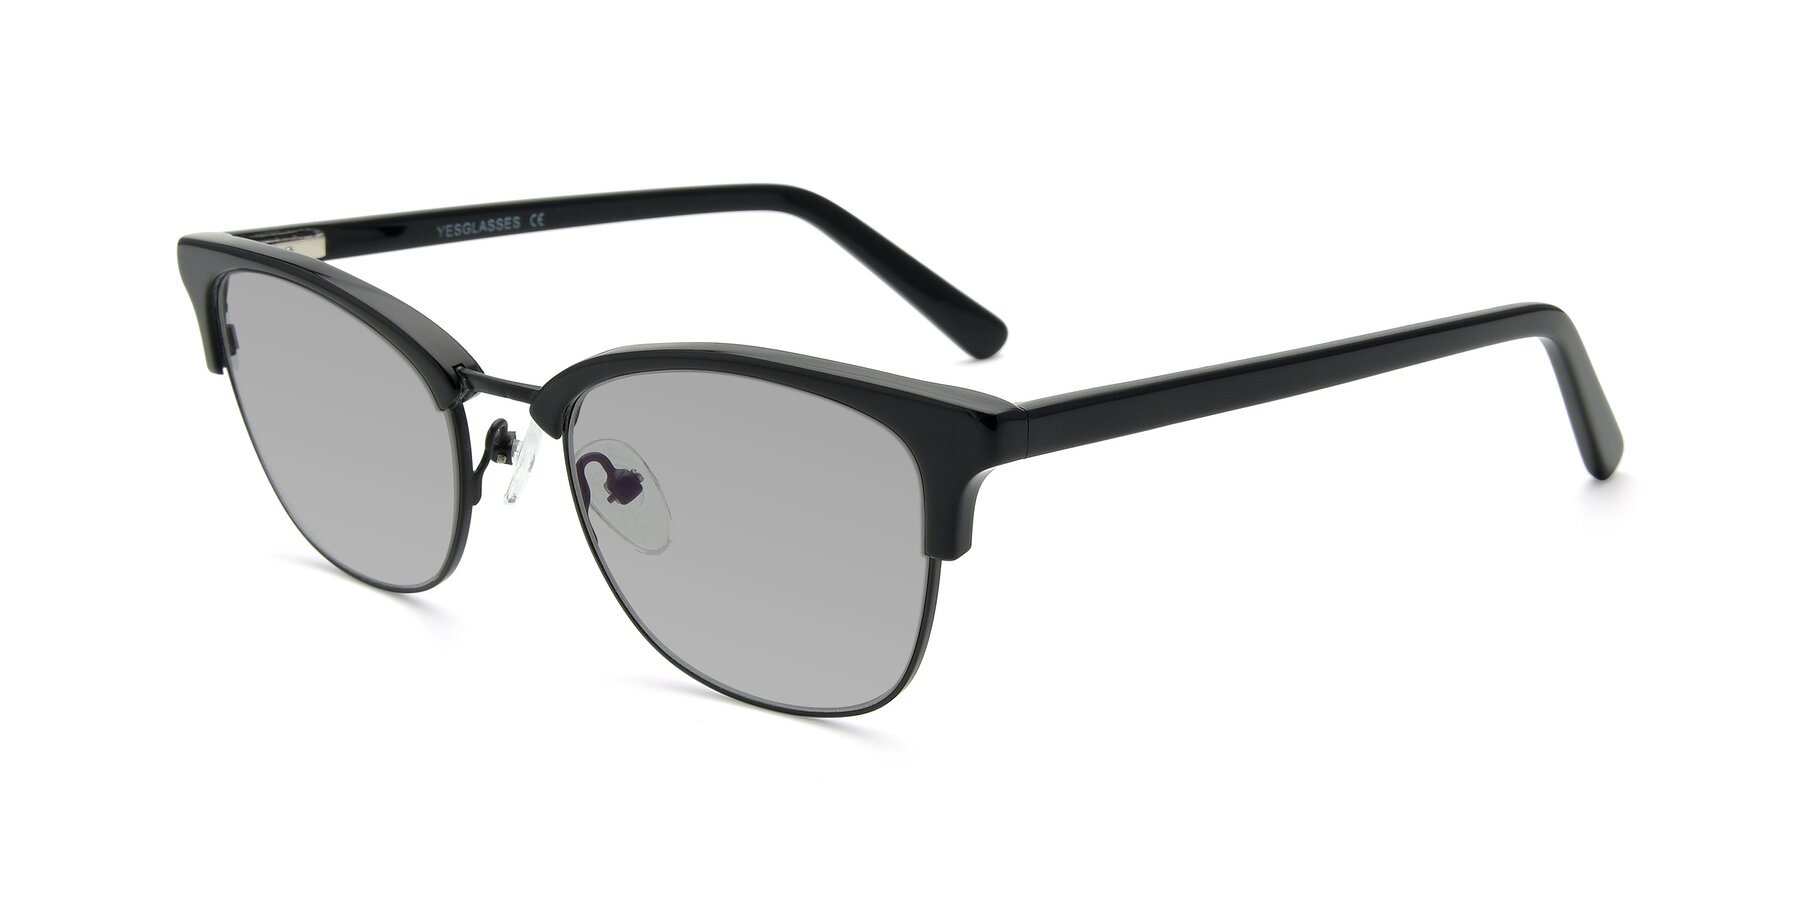 Angle of 17463 in Black with Light Gray Tinted Lenses